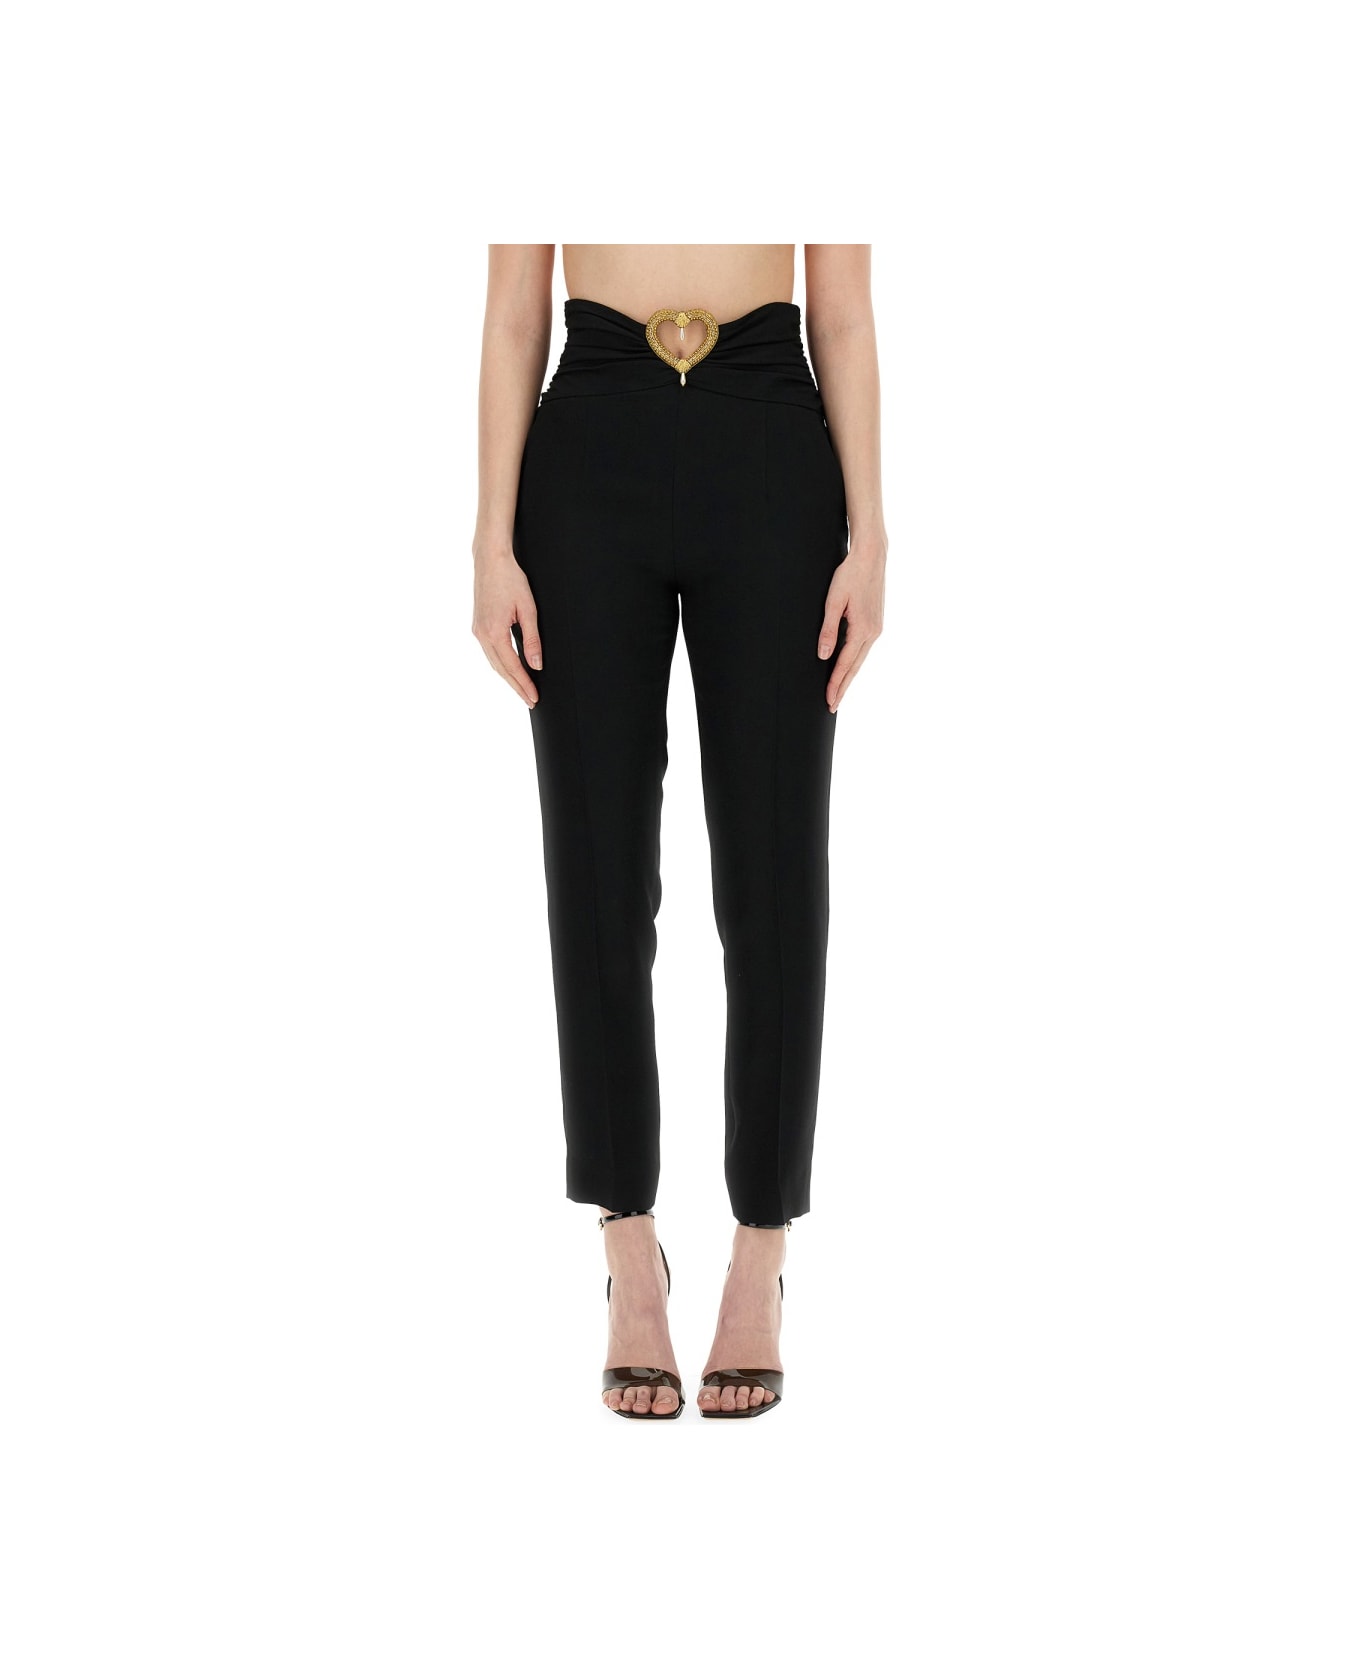 Moschino Pants With Heart Application - BLACK